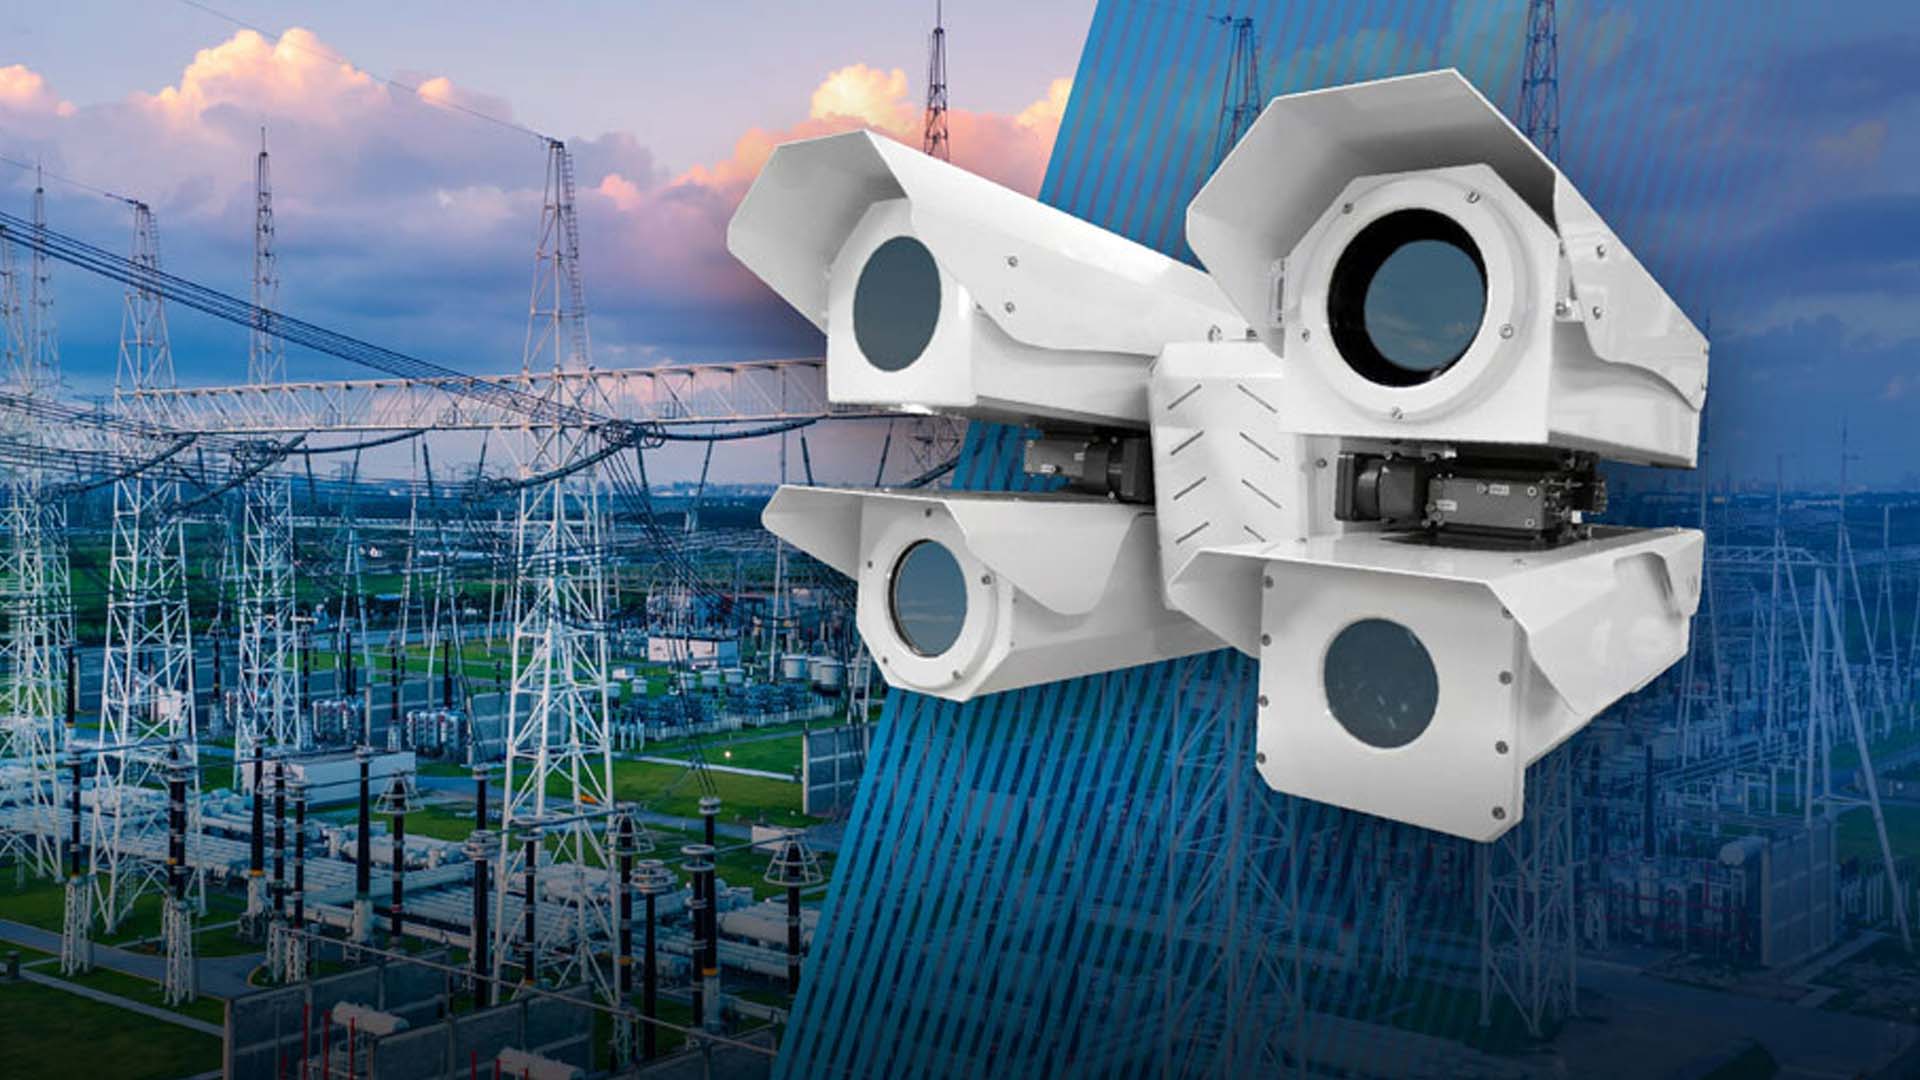 Motorola Solutions Acquires Silent Sentinel, a Provider of Specialized, Long-Range Cameras